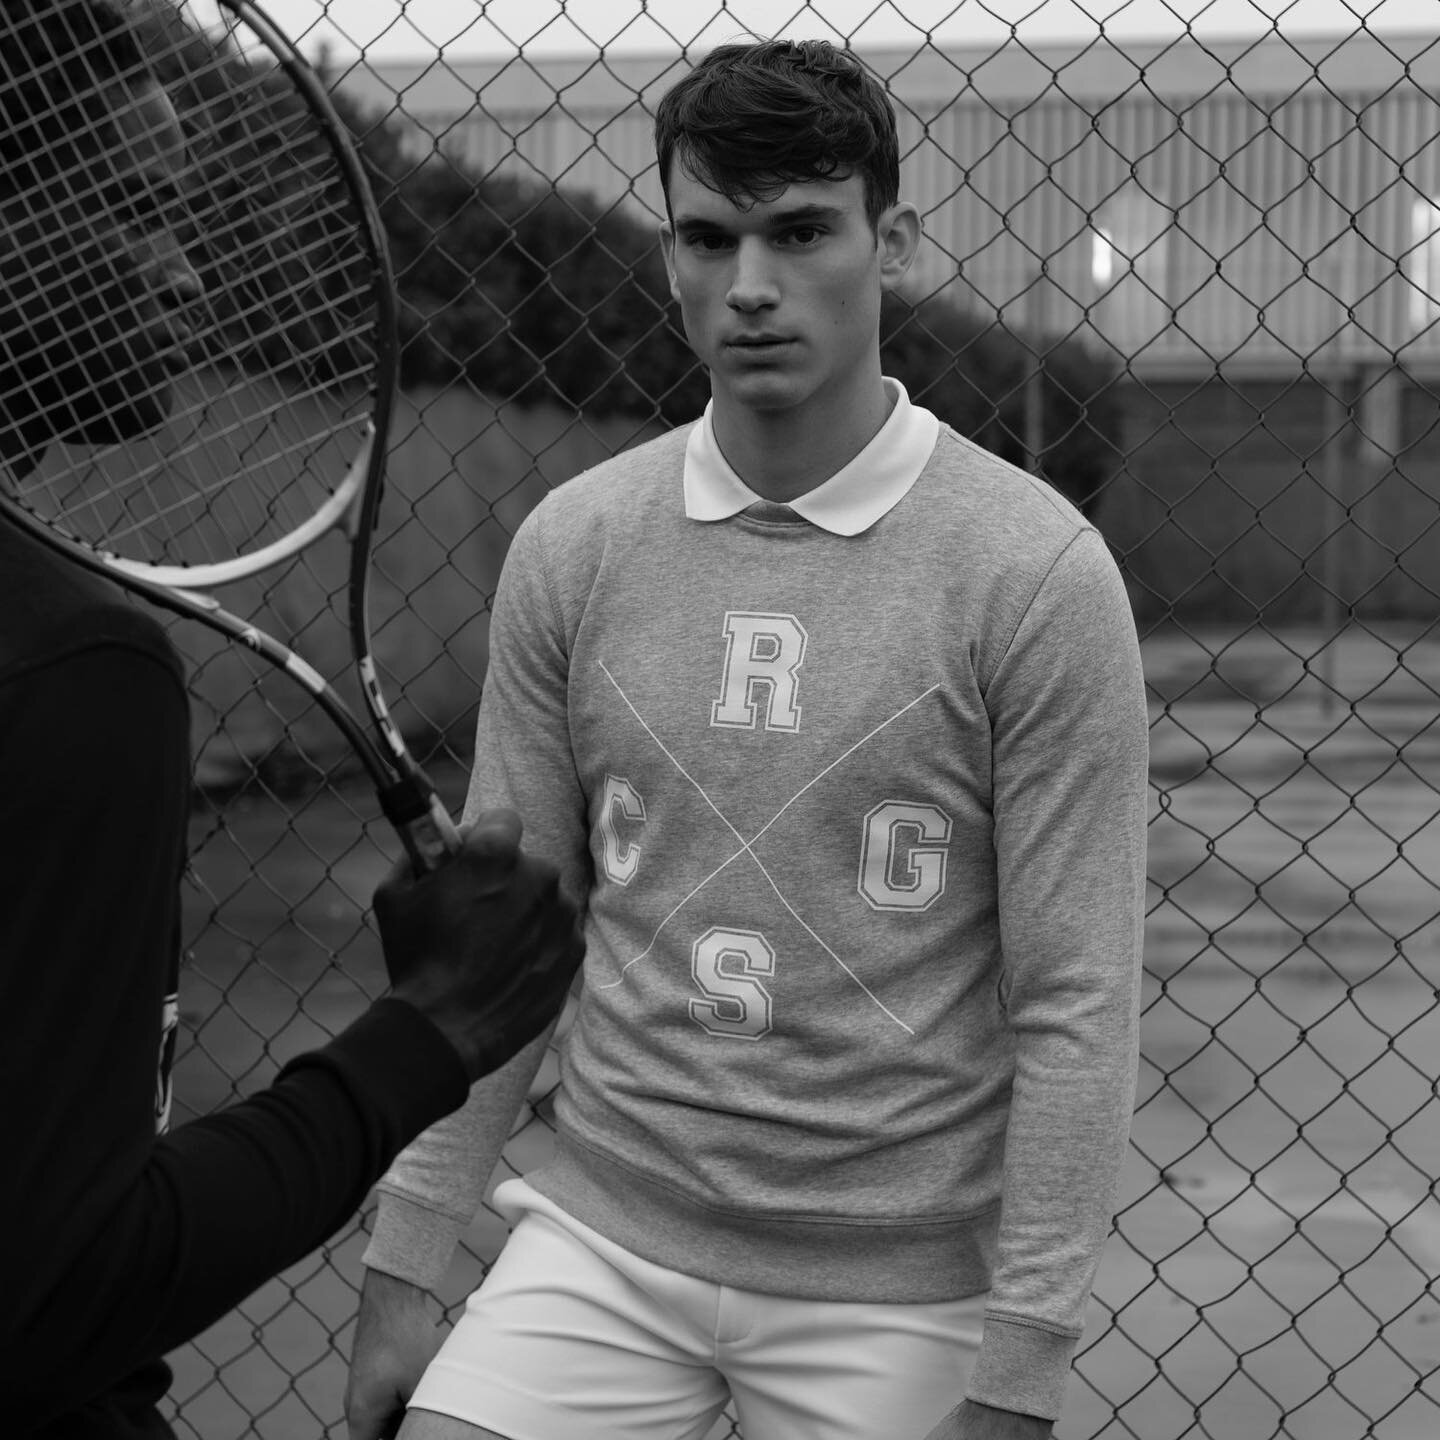 @therakishgent Sporting Club campaign 3/4 
At the Tennis Club with @teo.guerrieri at @boommodels by @leecooperwood with grooming by @marademarcomua 
Shop the sweatshirts now